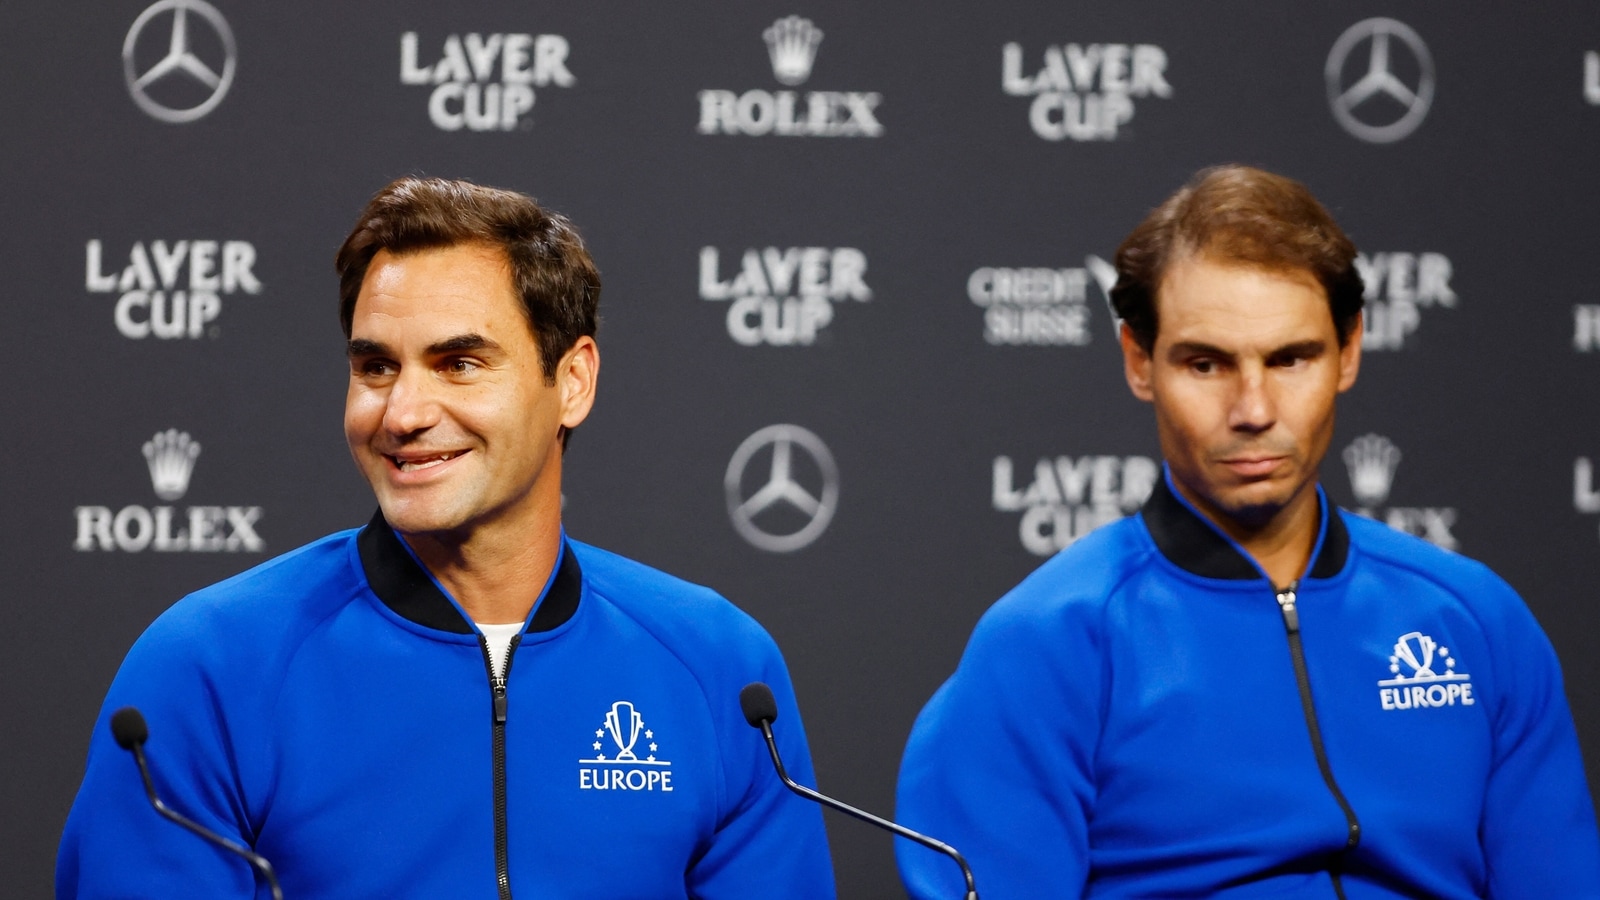 laver-cup-federer-confirmed-to-team-up-with-nadal-in-his-final-match-check-day-1-entire-schedule-and-order-of-play